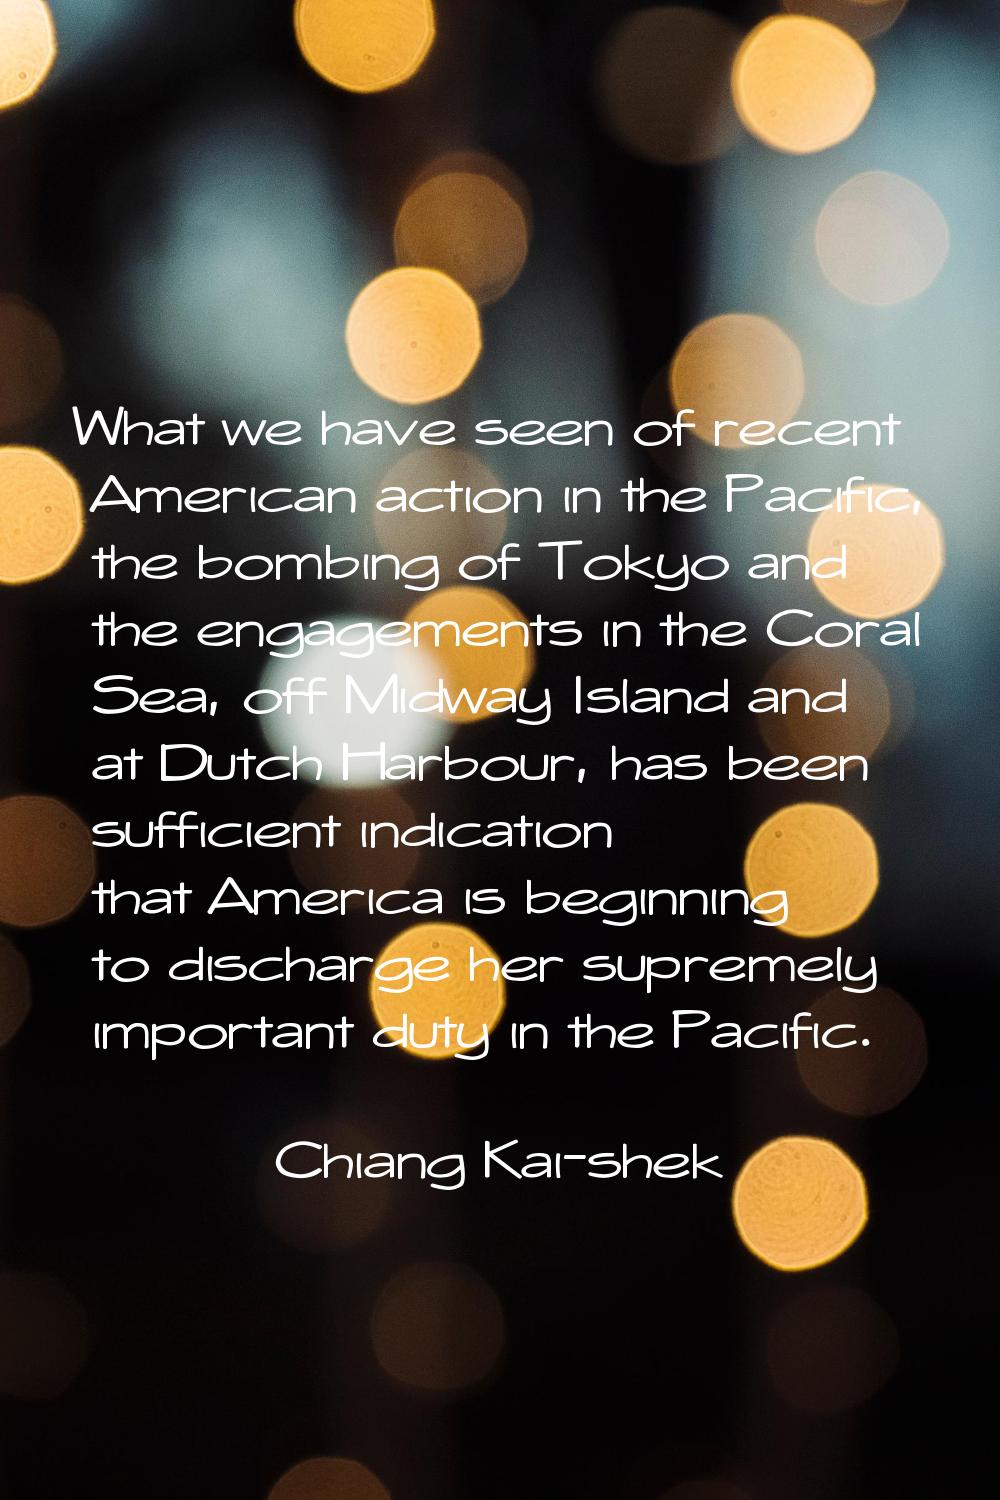 What we have seen of recent American action in the Pacific, the bombing of Tokyo and the engagement